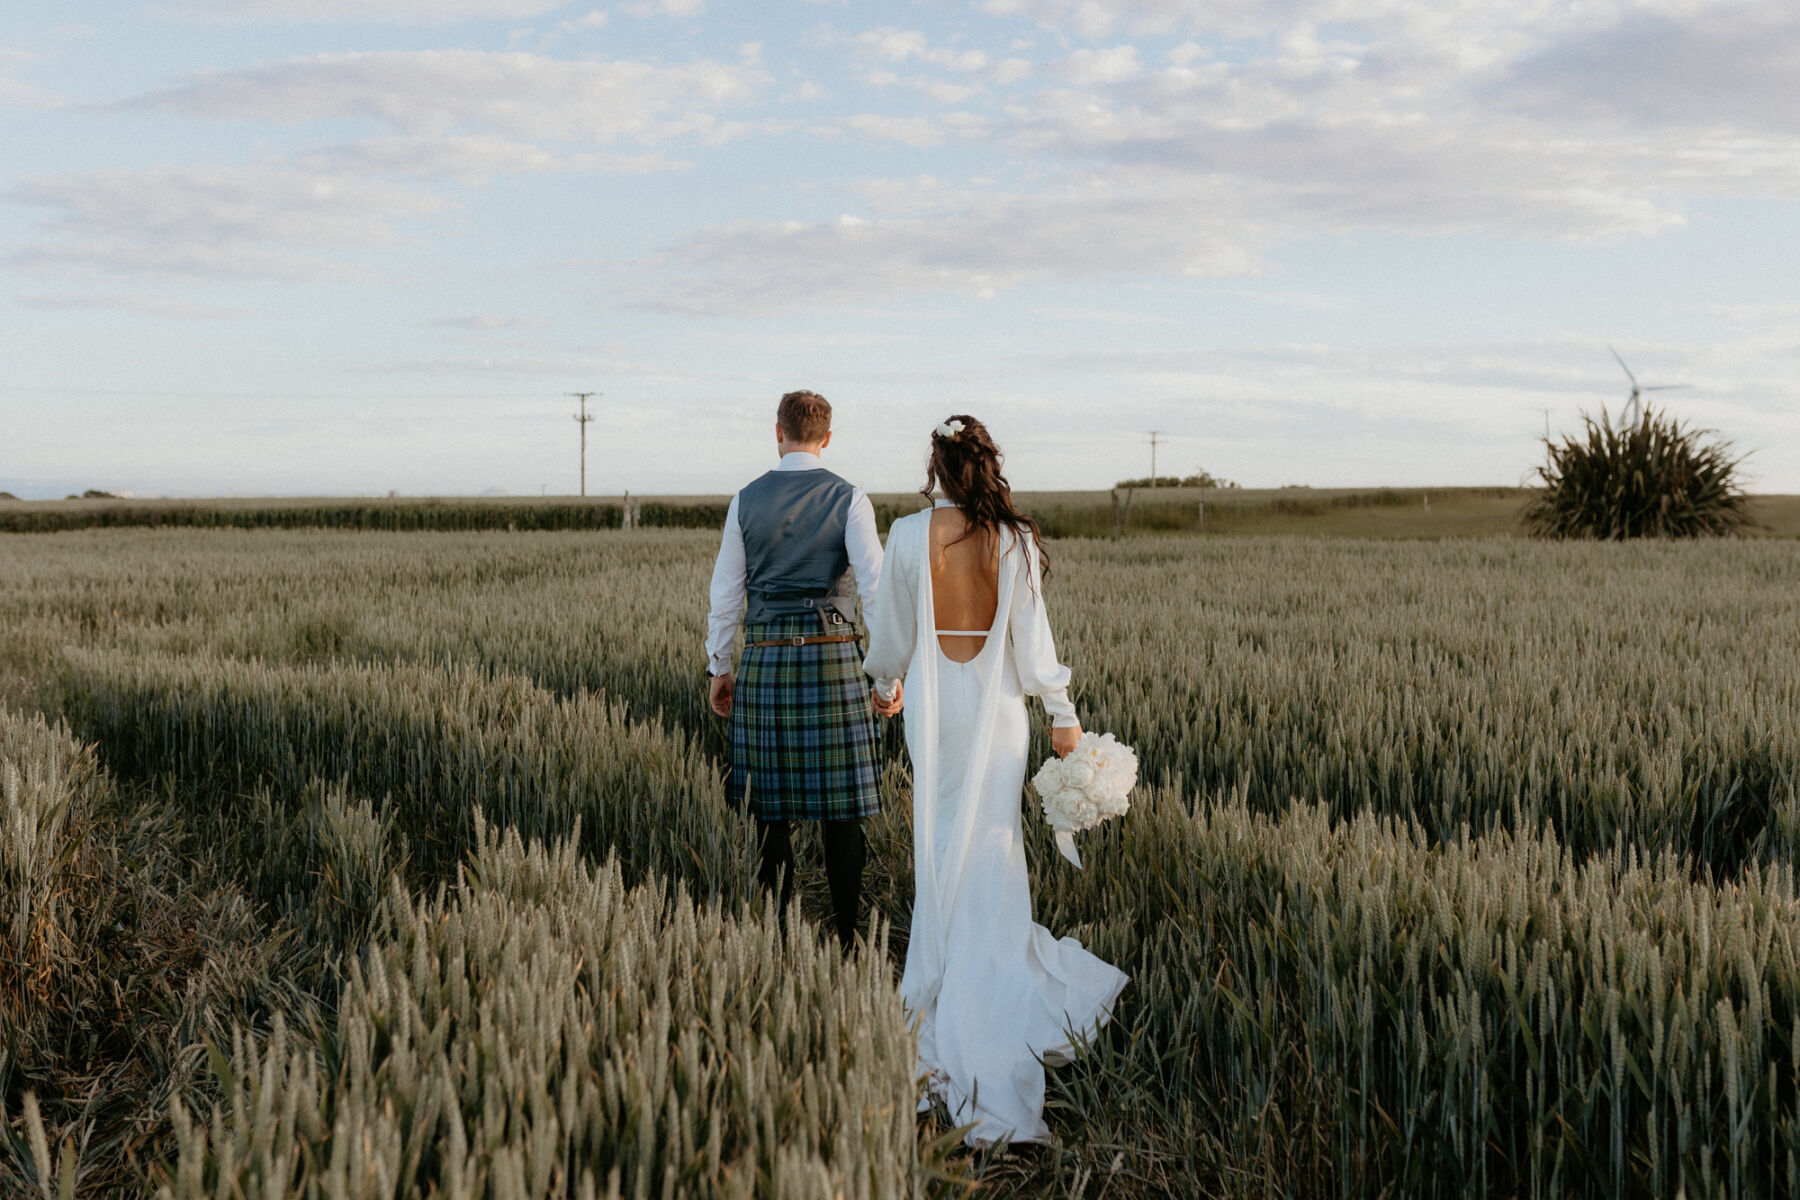 Bride in a backless wedding dress walking with her groom through a field